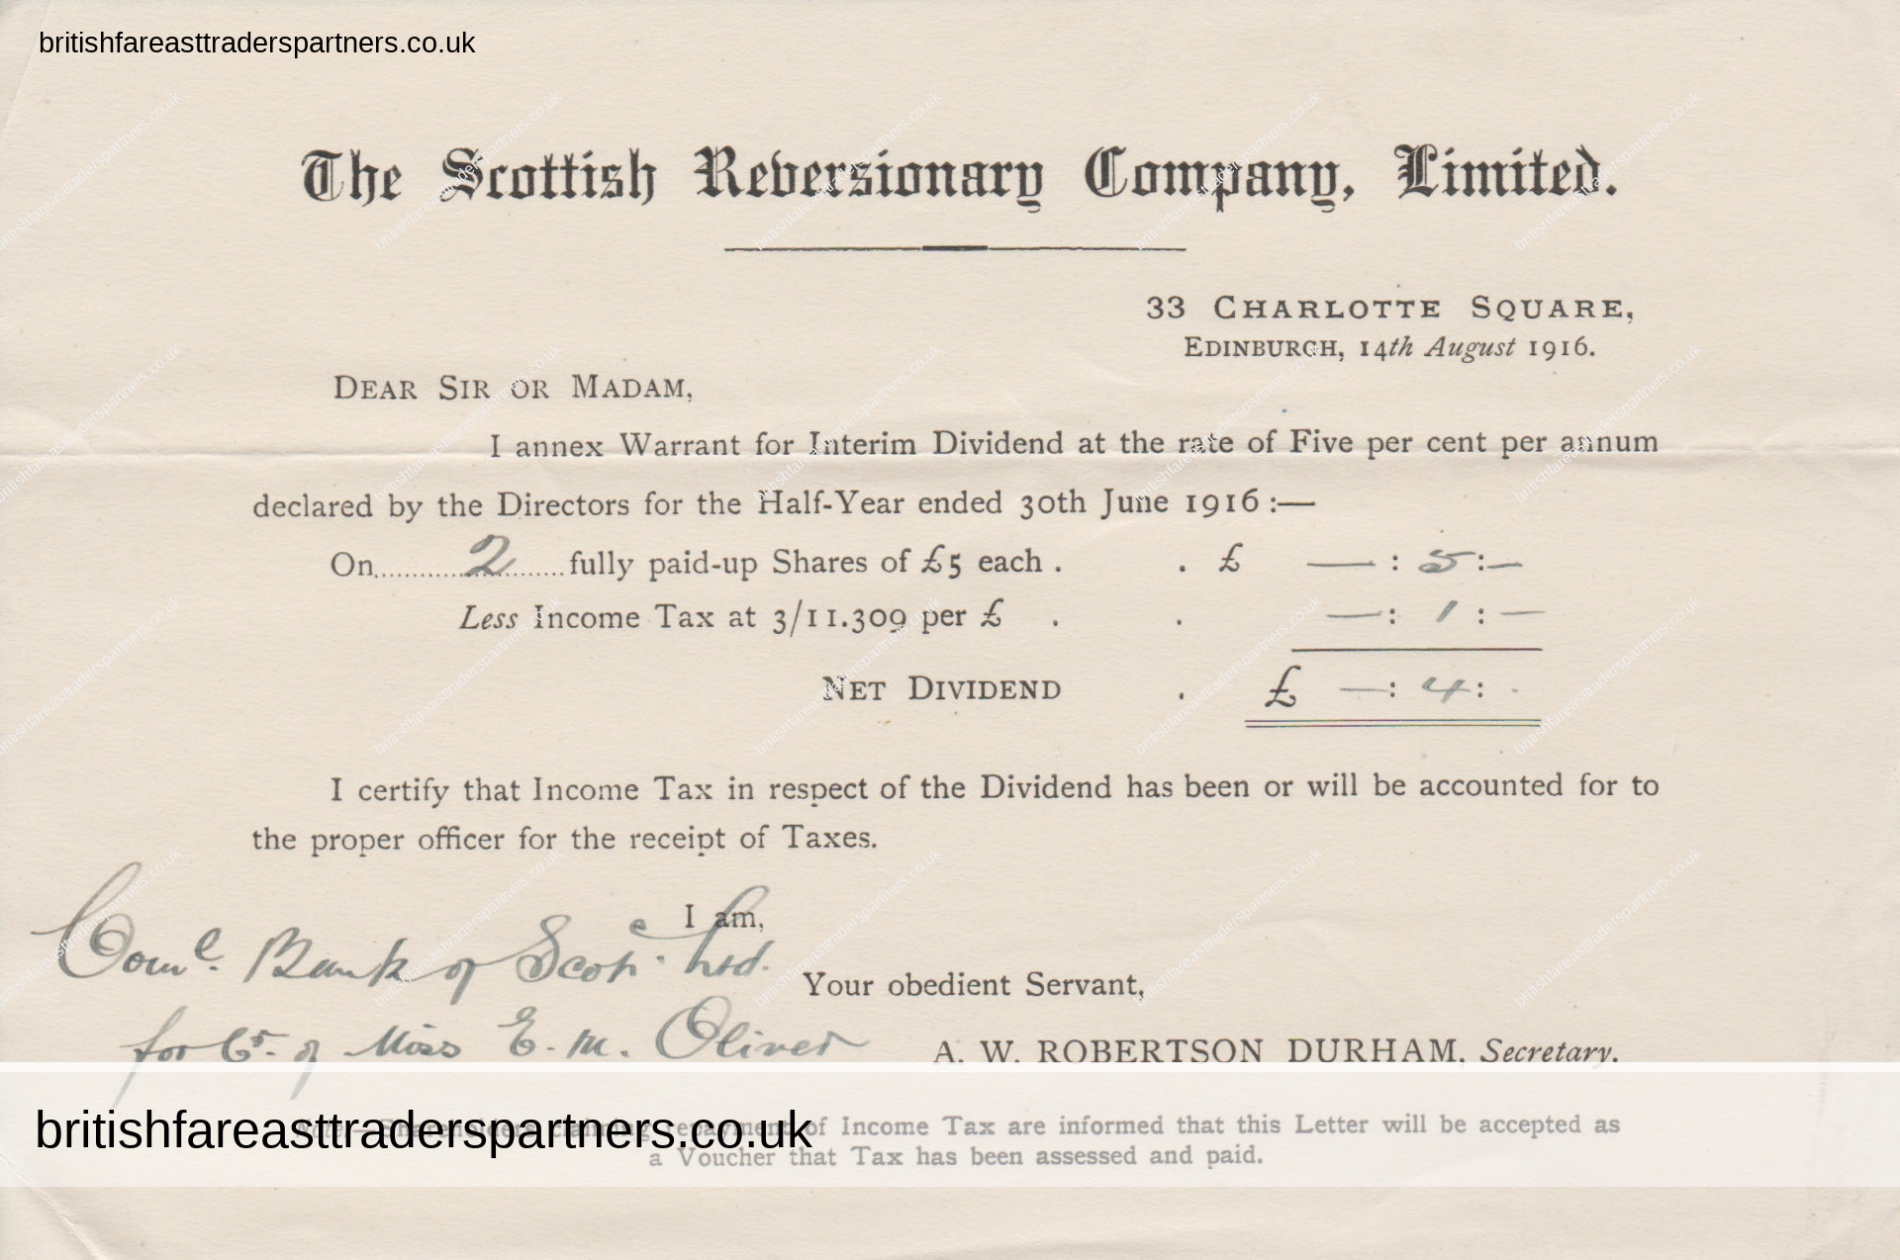 ANTIQUE 1916 “The Scottish Reversionary Company, Limited” Dividend WARRANT